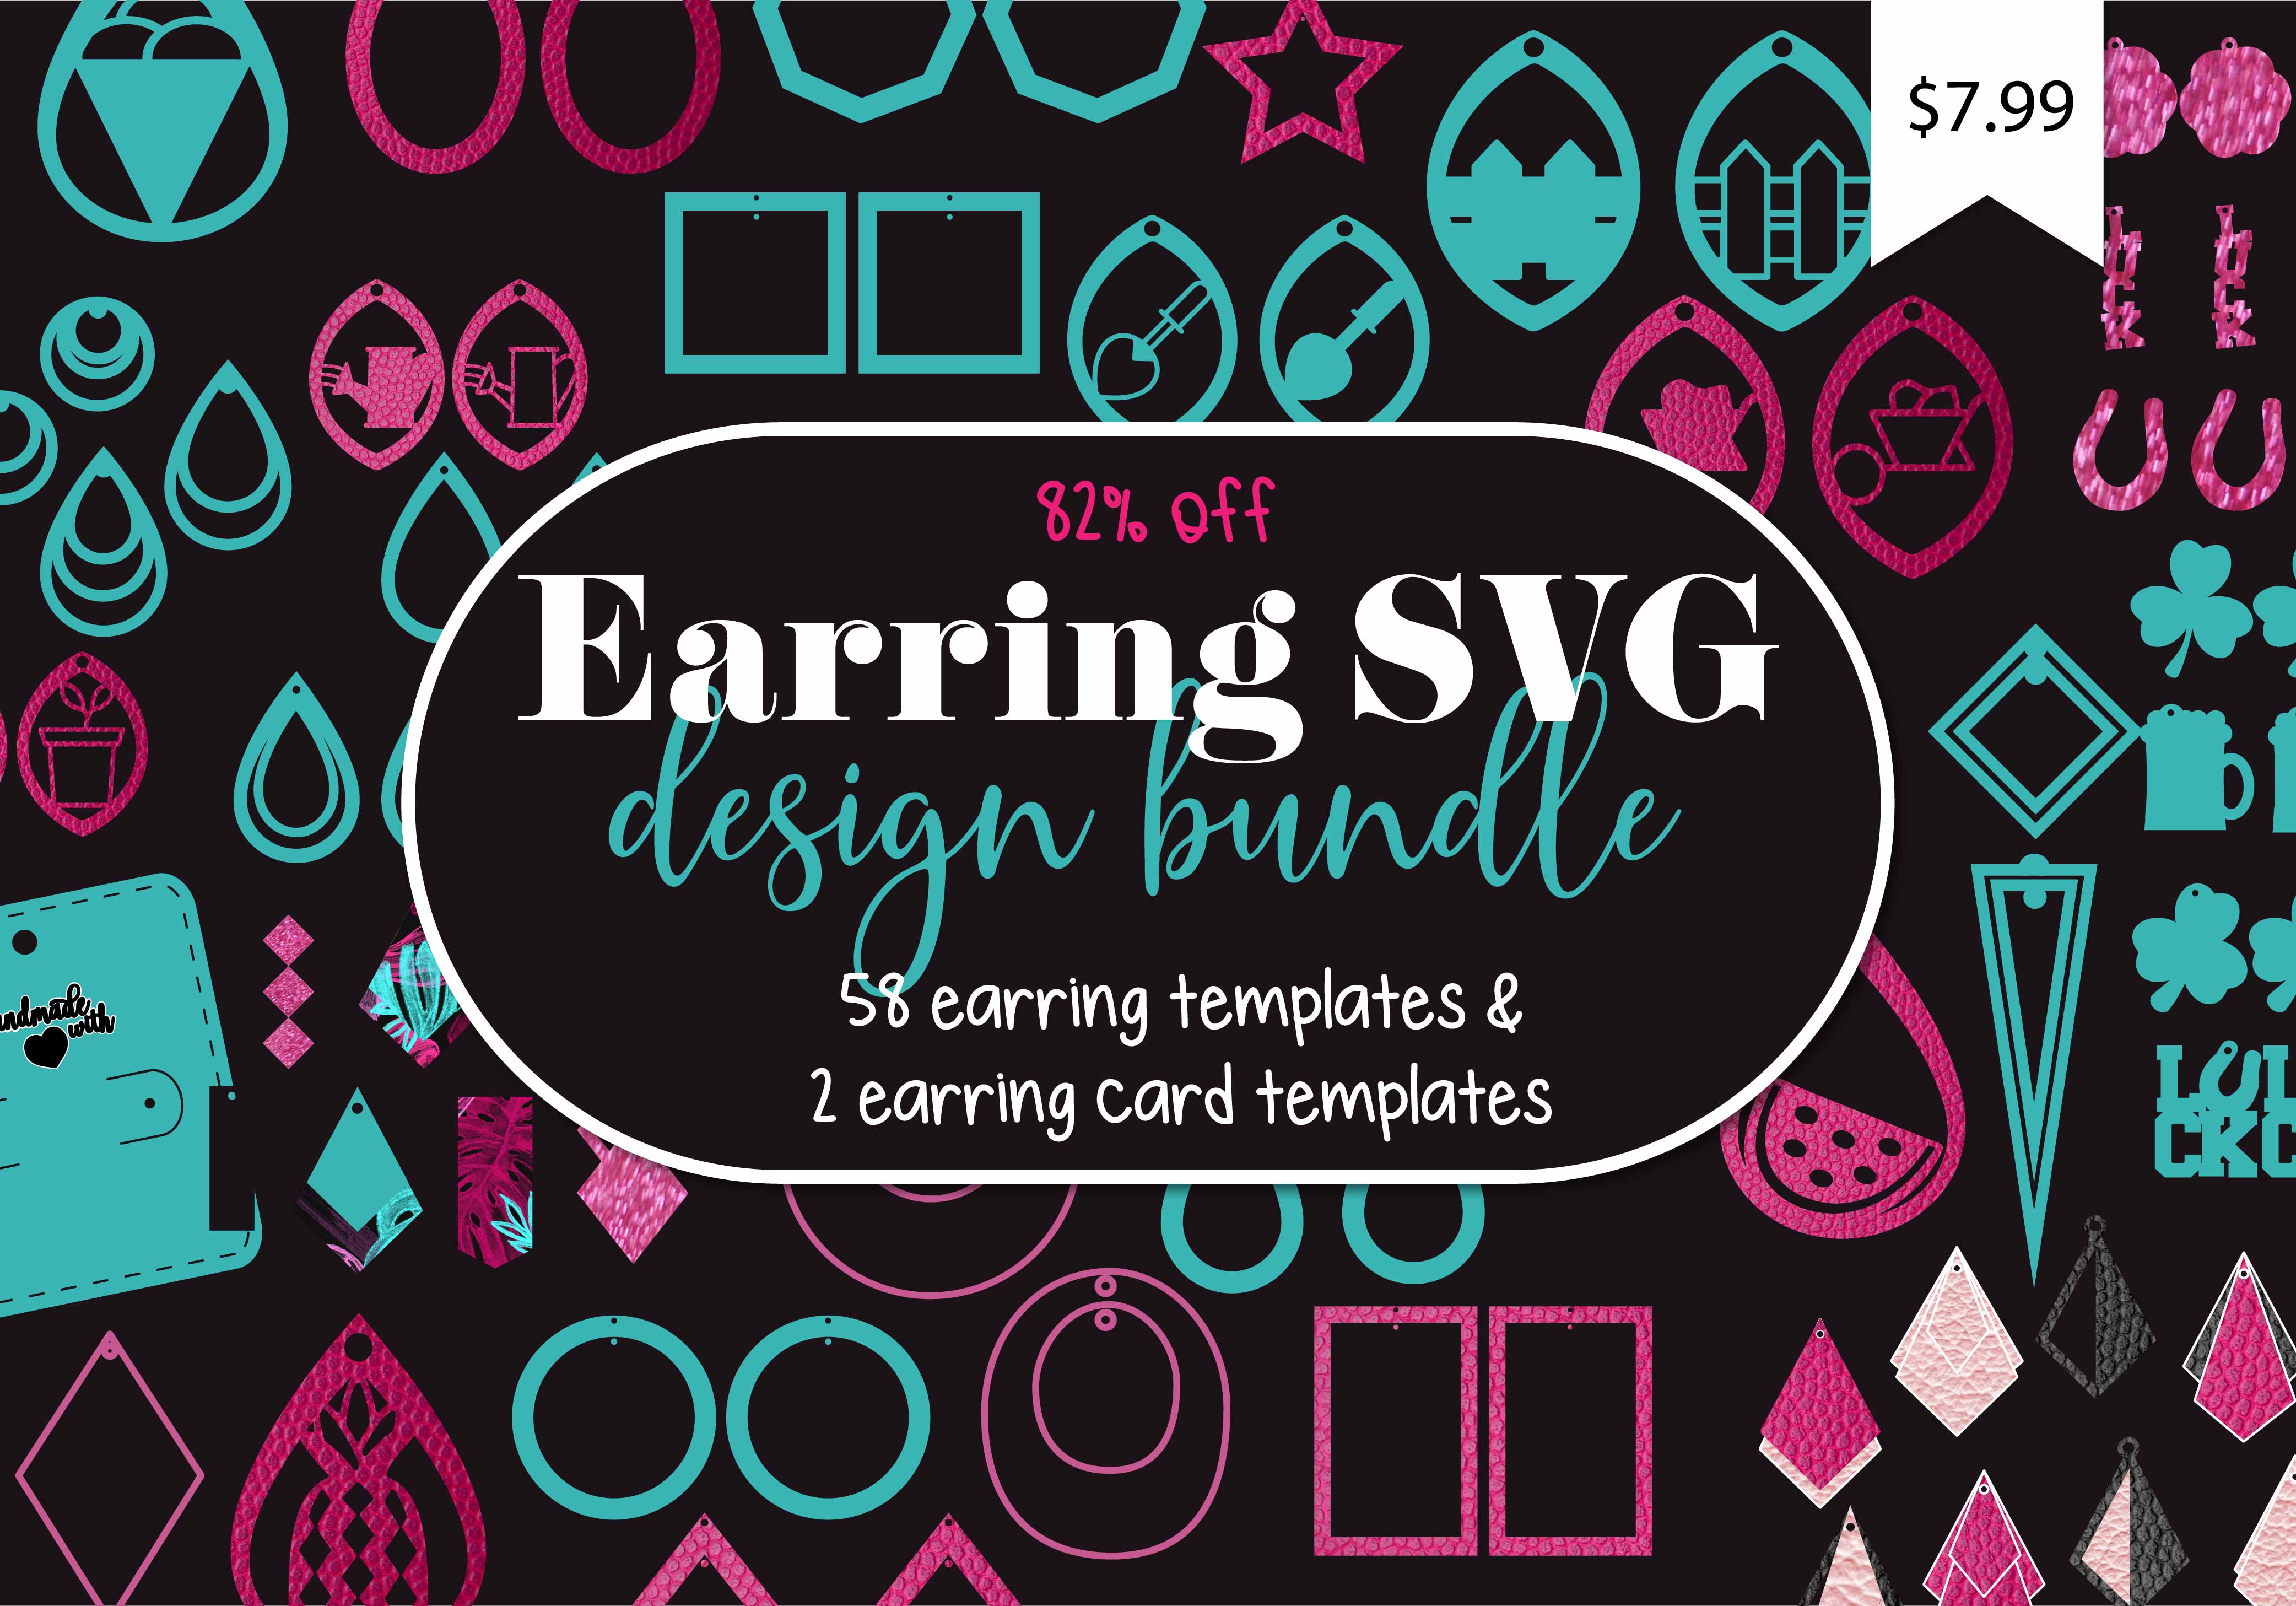 Download State Earrings Leather Earrings Earring Svg Bundle Buy 3 Get 1 Free Earring Cut File Louisiana Earrings Cut File Earring Template Clip Art Art Collectibles Delage Com Br